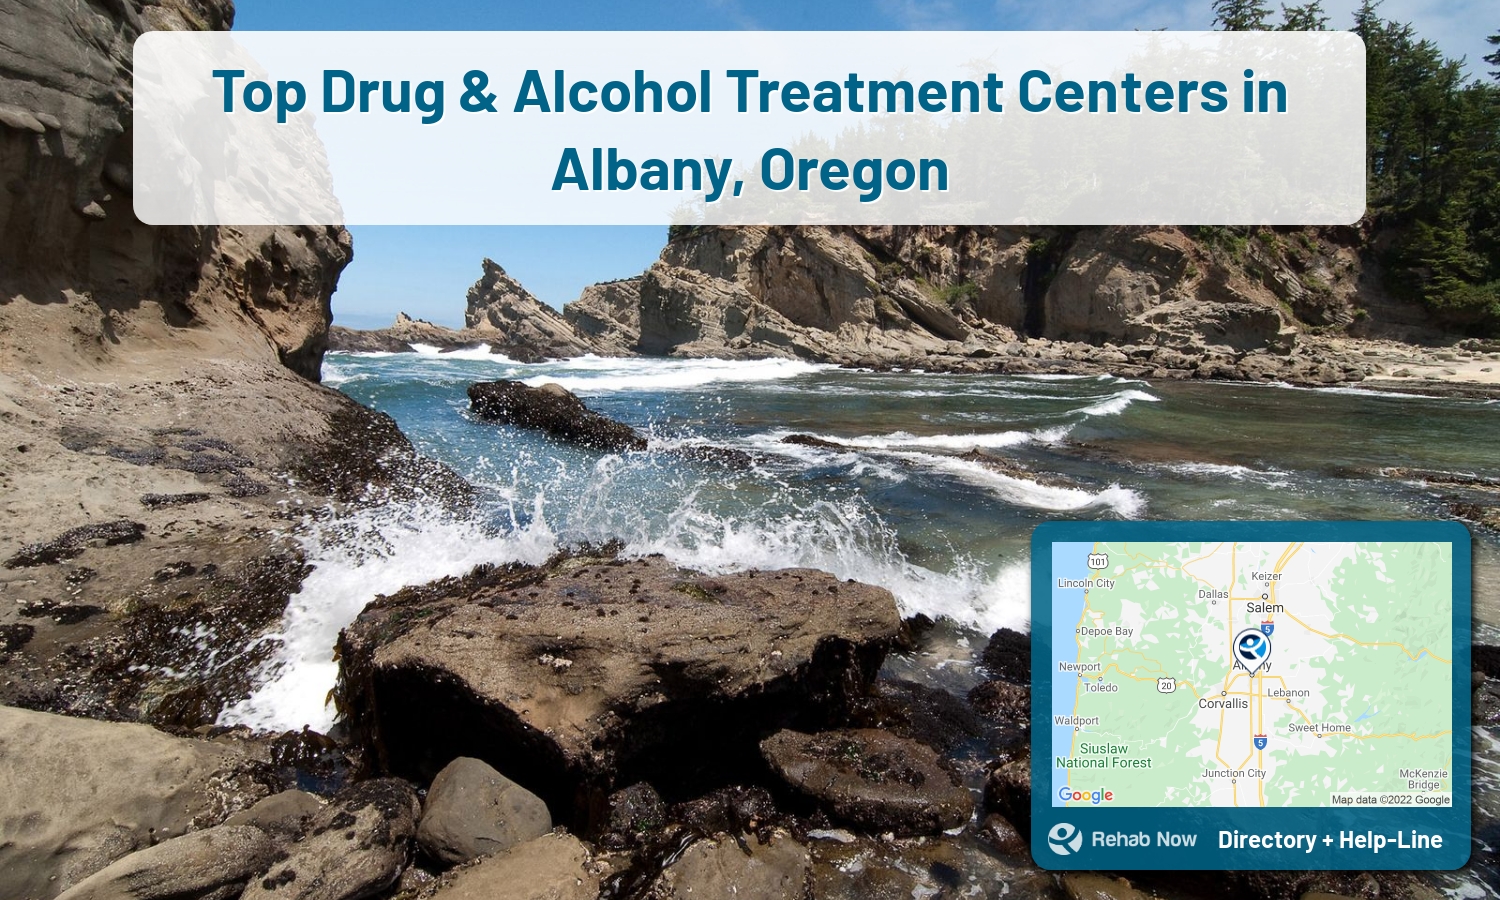 Albany, OR Treatment Centers. Find drug rehab in Albany, Oregon, or detox and treatment programs. Get the right help now!